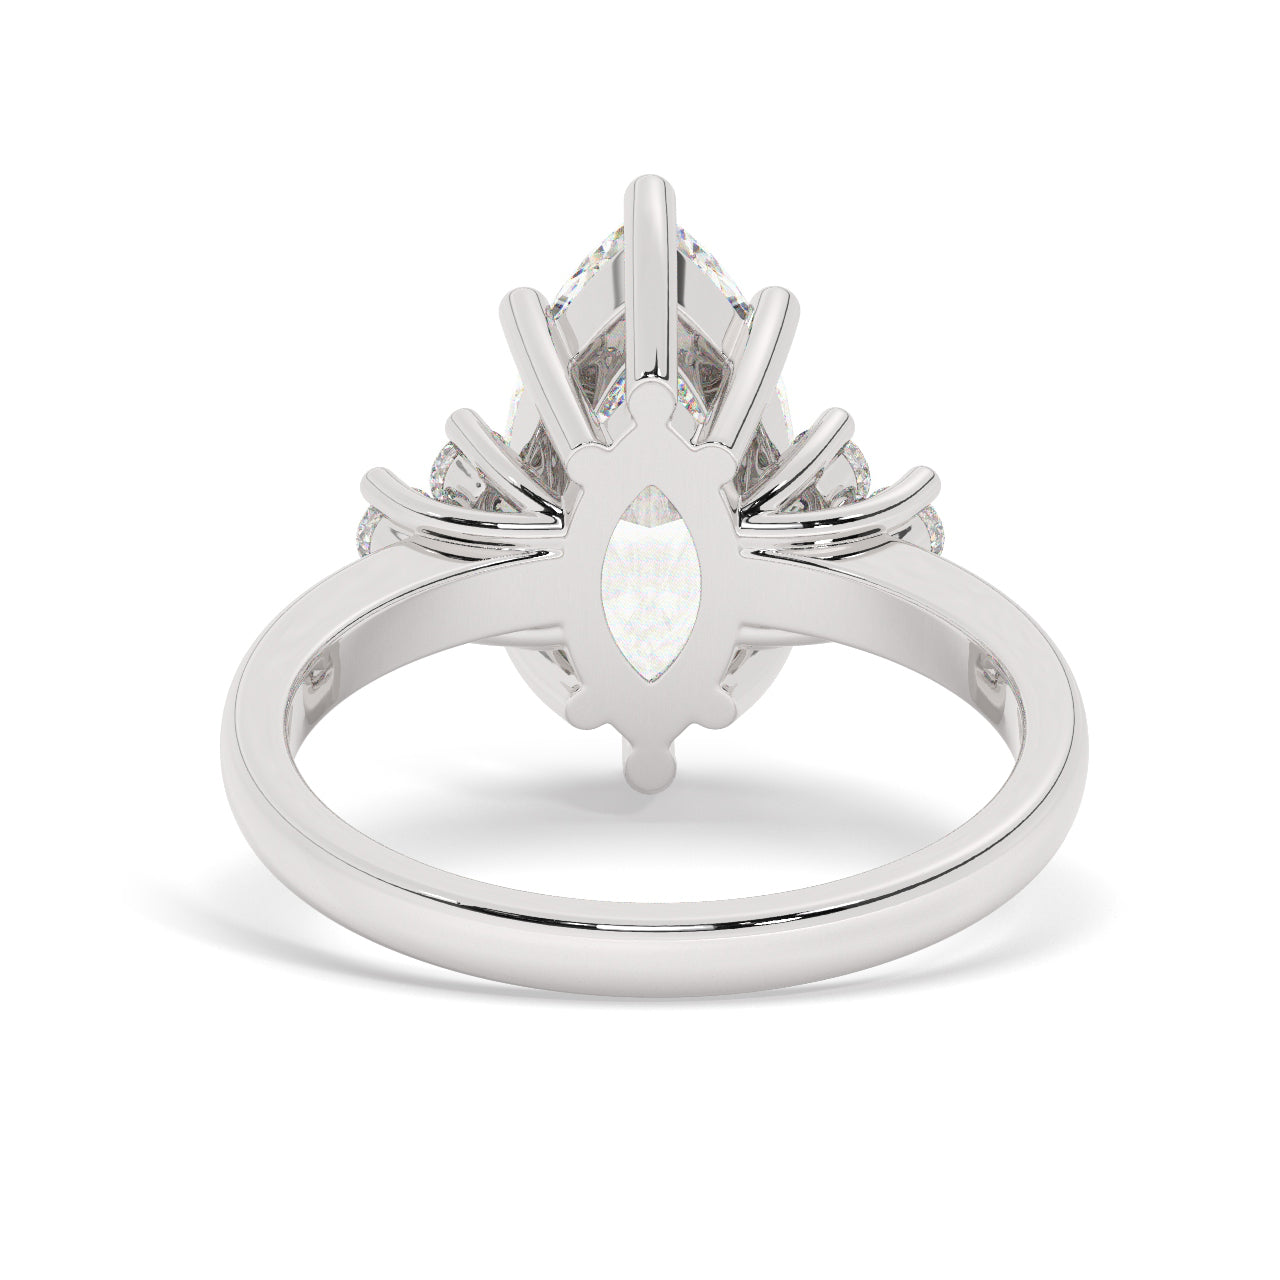 White Gold Marquis Cut Engagement Ring Accompanied by Round Stones - Back View